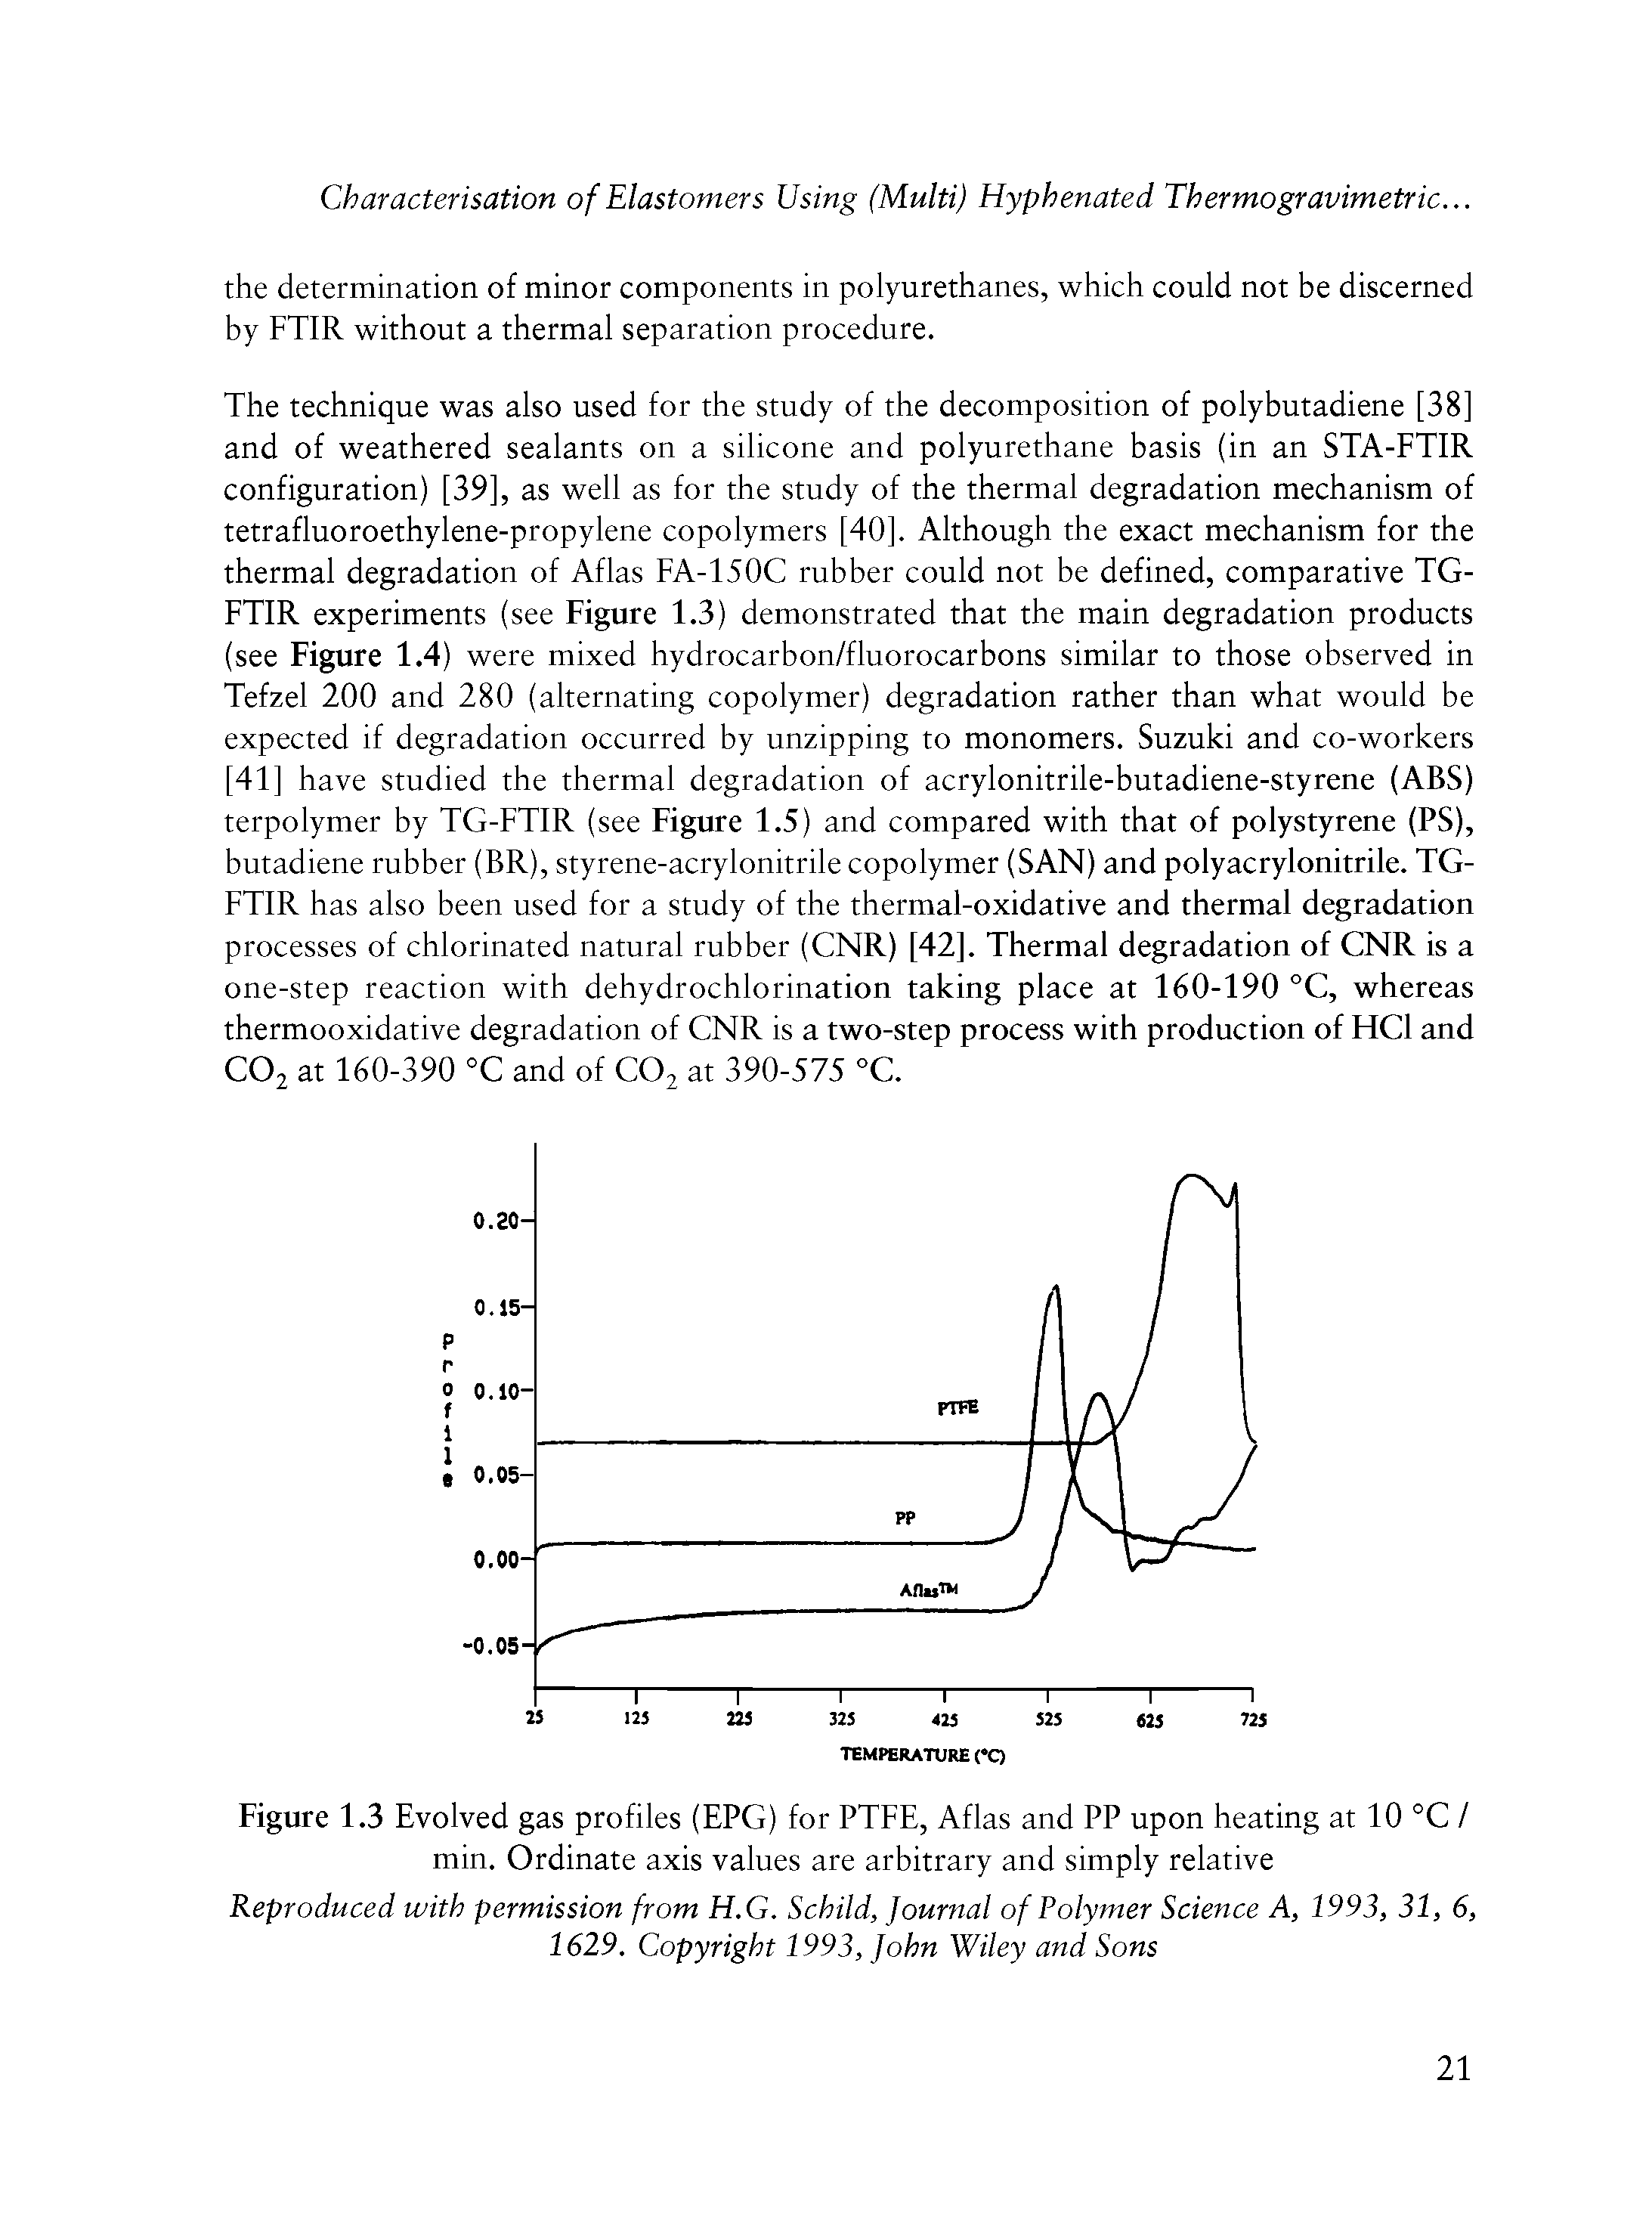 Figure 1.3 Evolved gas profiles (EPG) for PTFE, Aflas and PP upon heating at 10 °C / min. Ordinate axis values are arbitrary and simply relative...